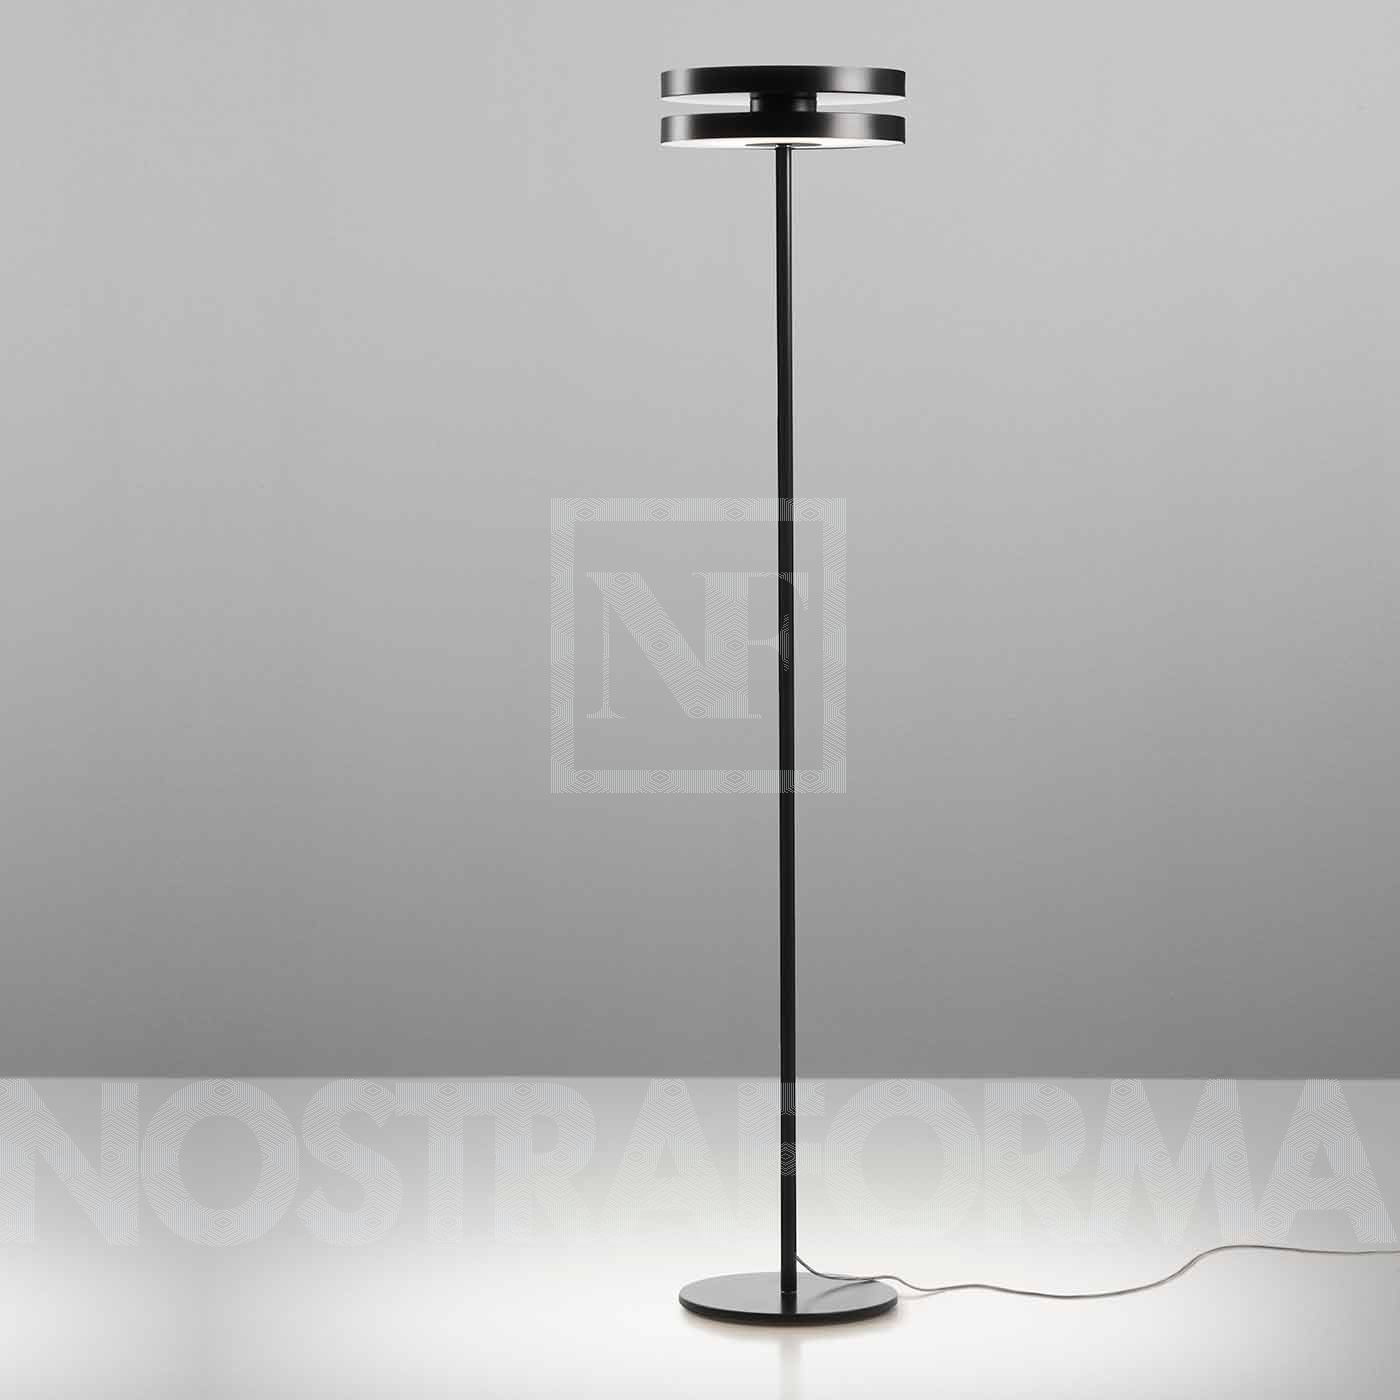 Prandina Led Machine F3 Dimmable Floor Lamp in size 1400 X 1400